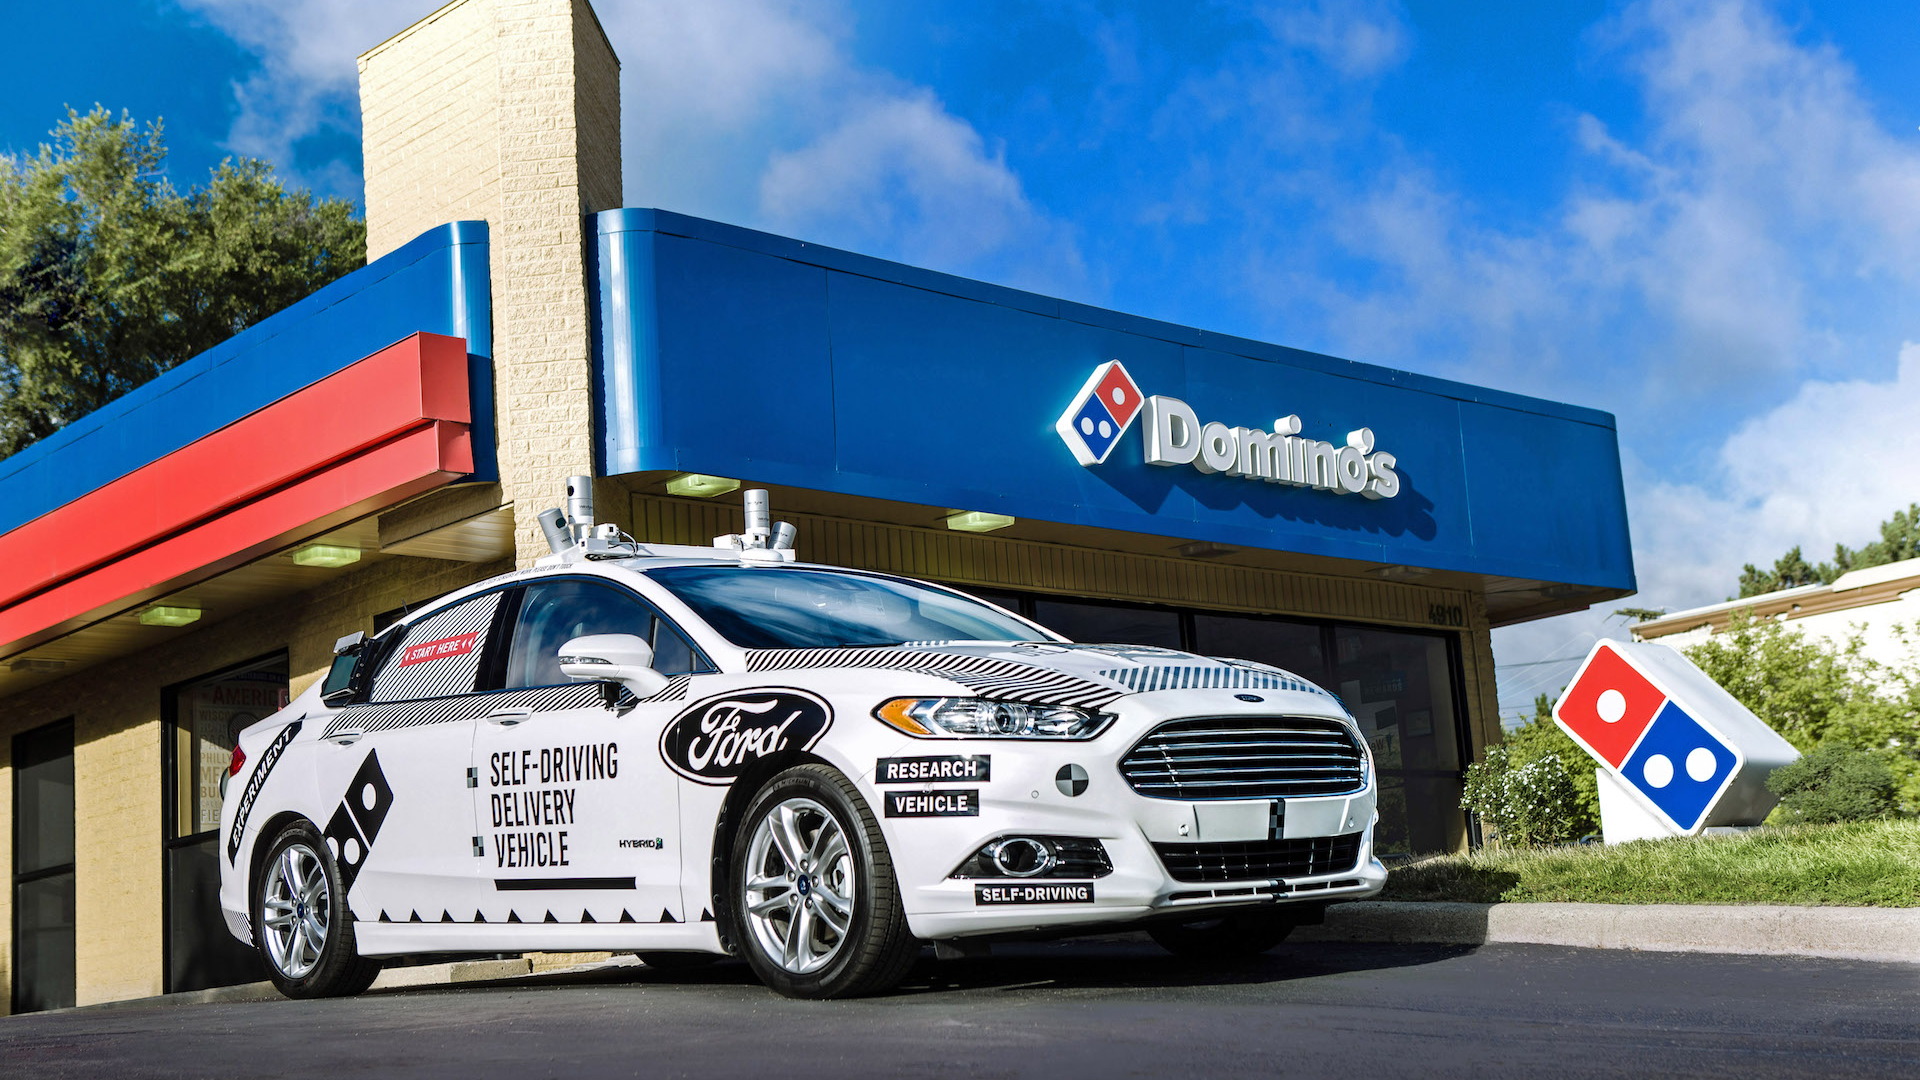 Self-driving Ford Fusion Hybrid for Domino's pizza delivery